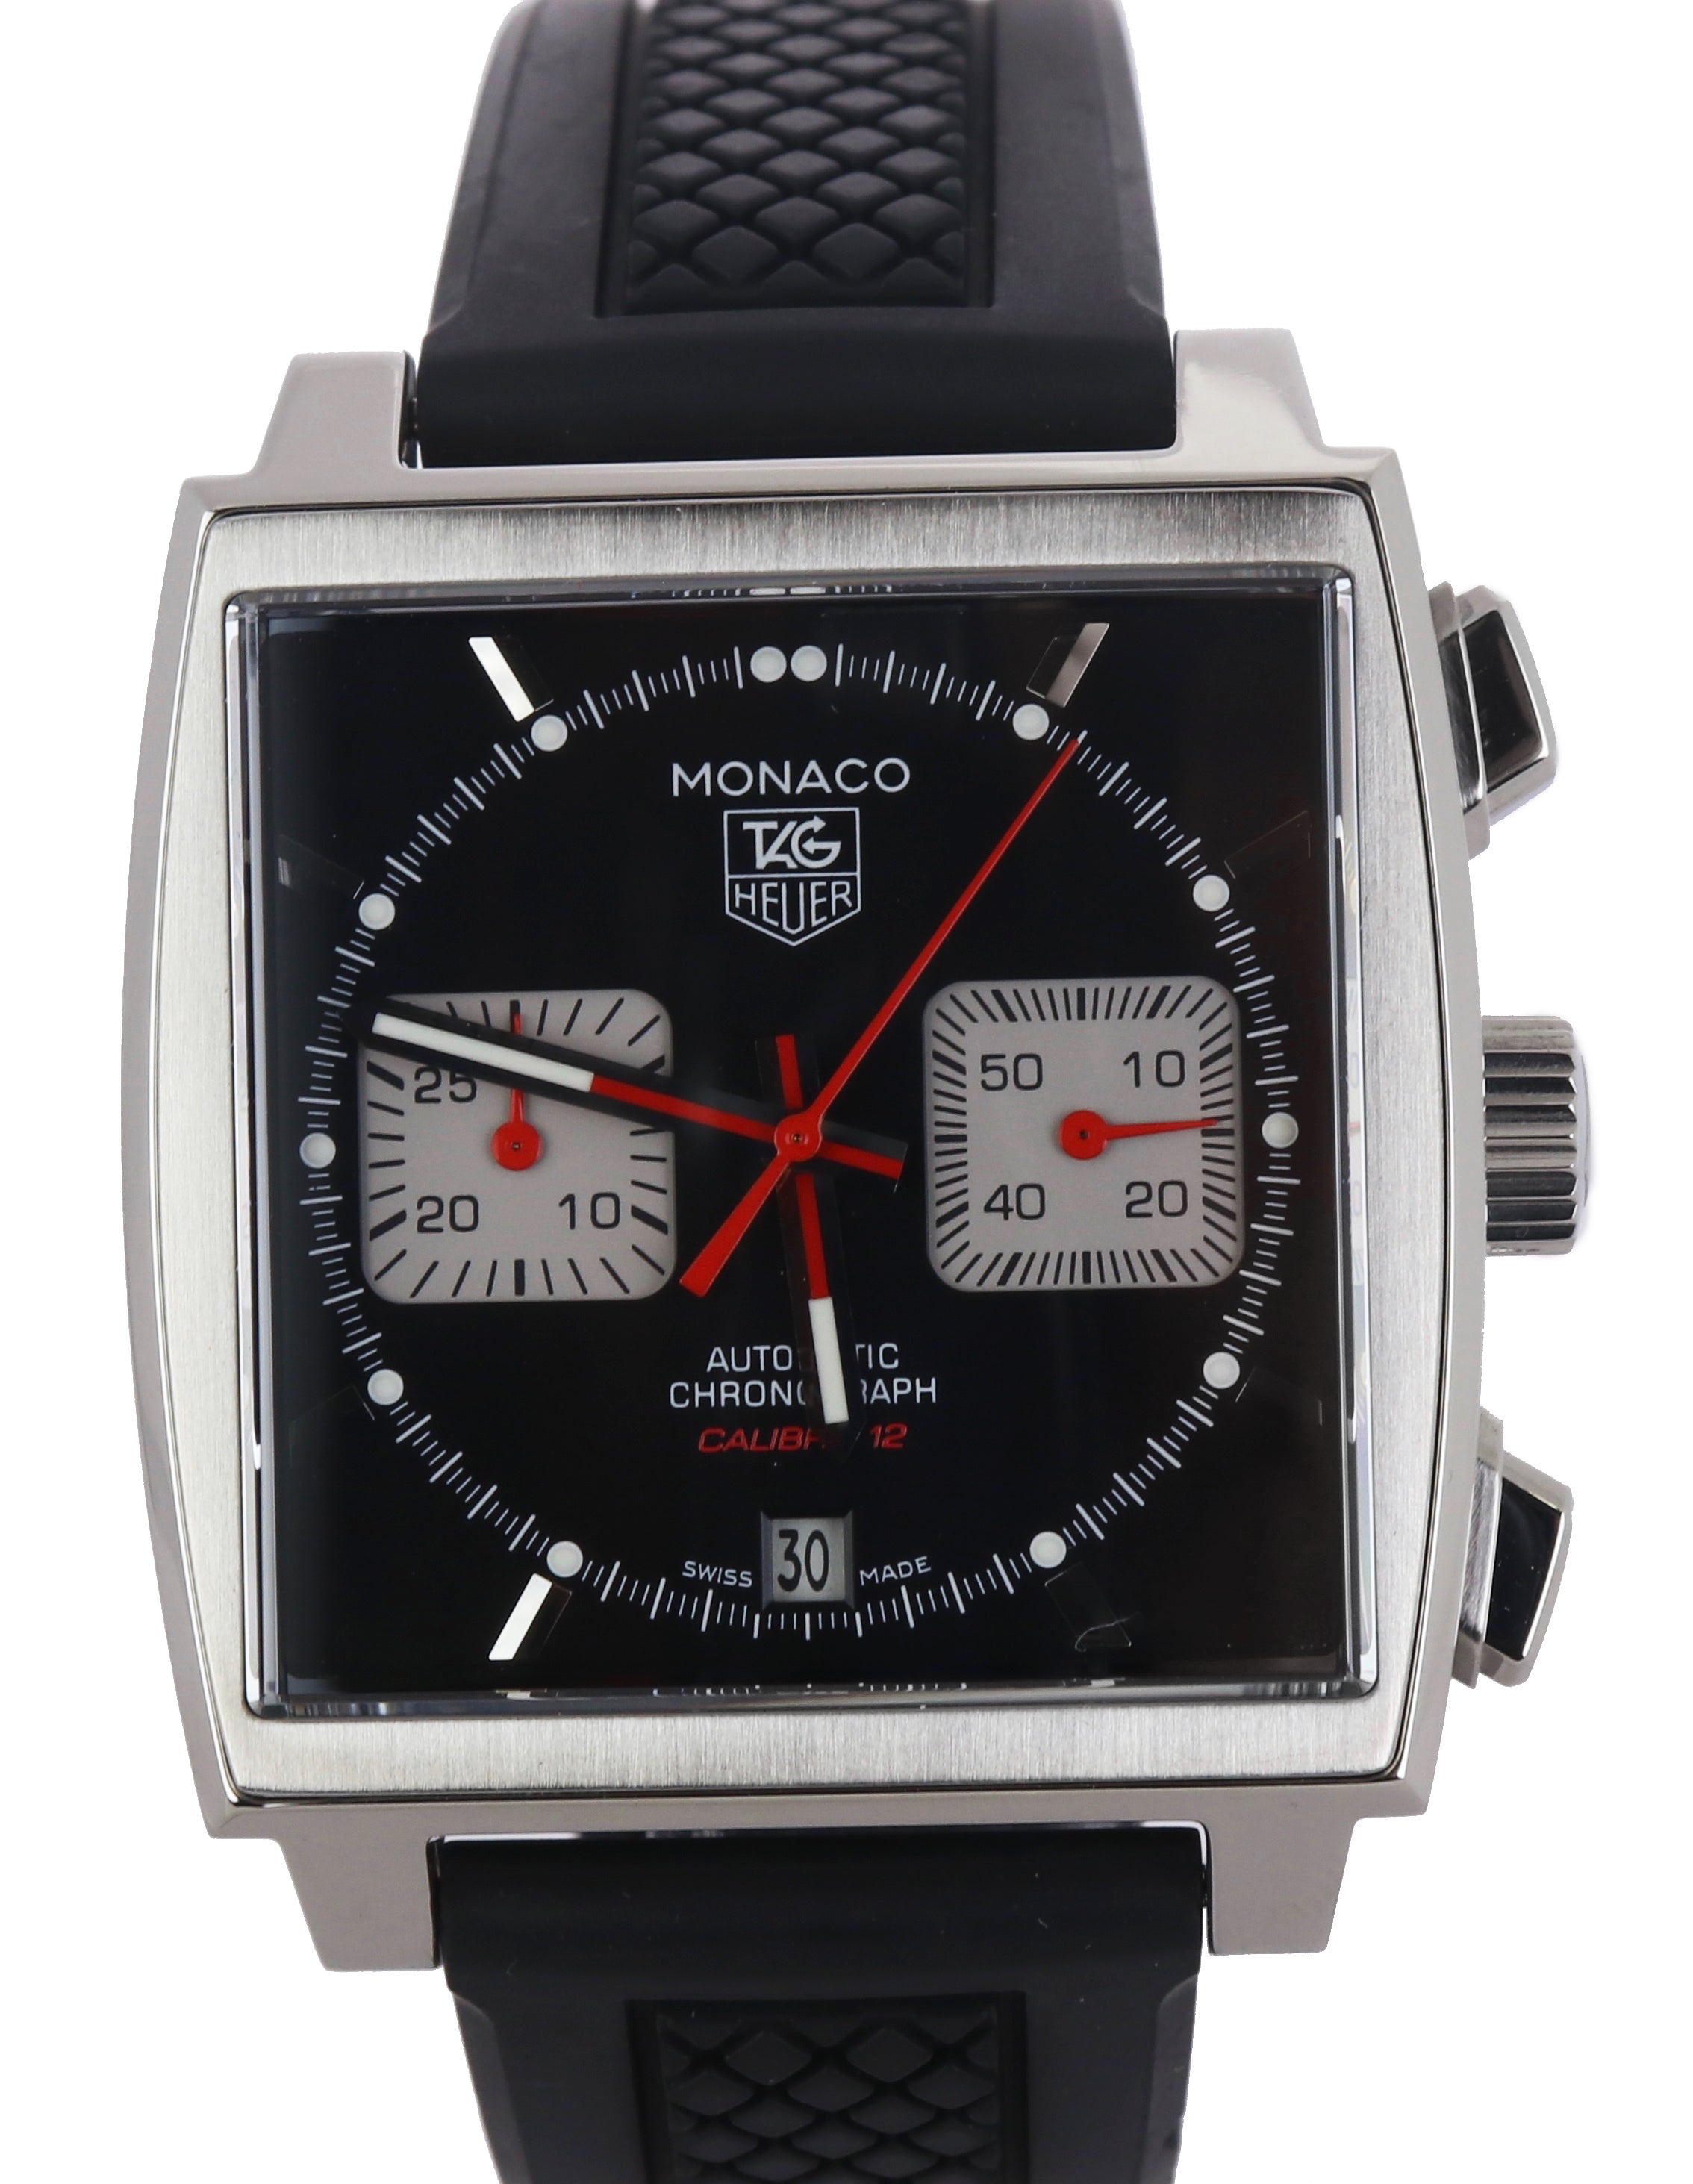 MINT TAG Heuer Monaco Calibre 12 Chronograph Black Stainless CAW2114 39mm Watch